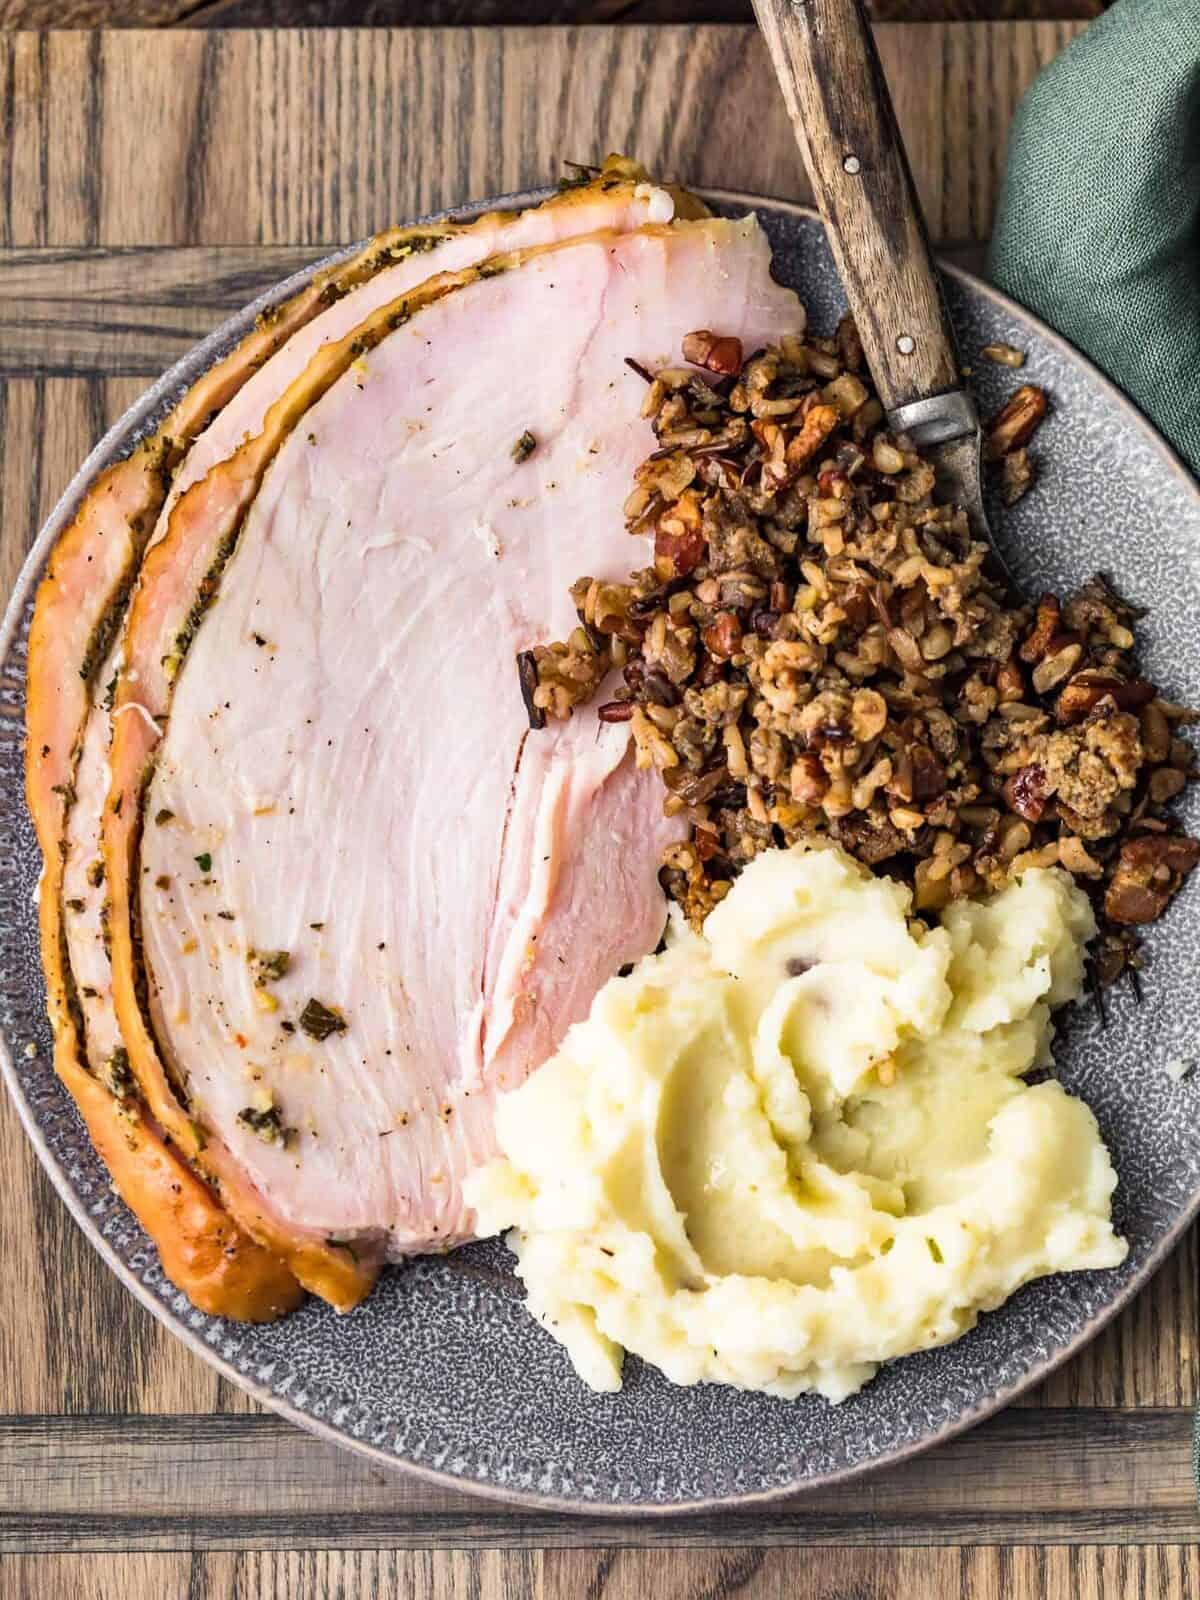 a plate of smoked turkey slices with stuffing and mashed potatoes